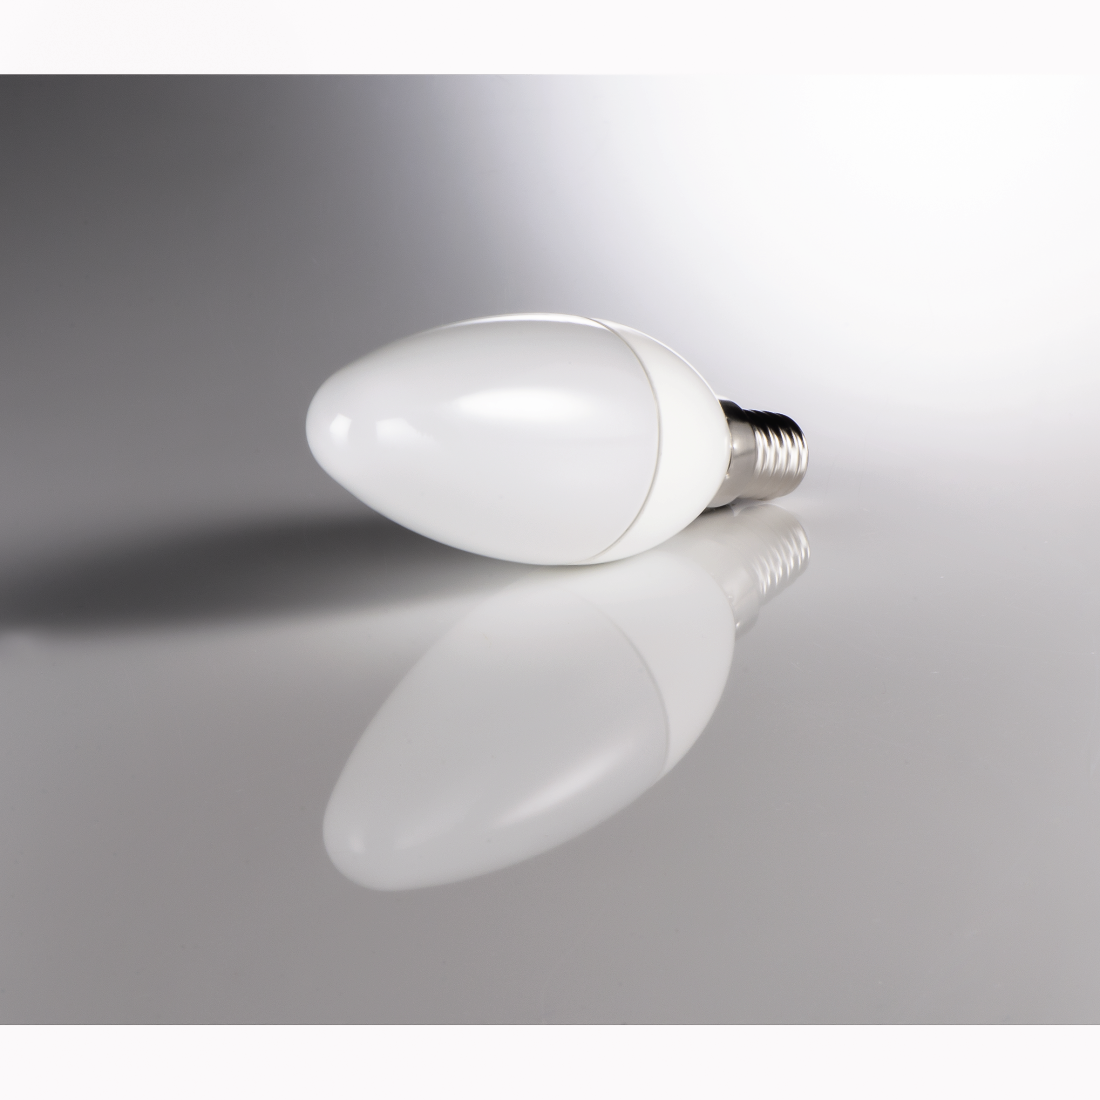 abx3 High-Res Image 3 - Xavax, LED Bulb, E14, 350lm Replaces 32W, Candle Bulb, warm white